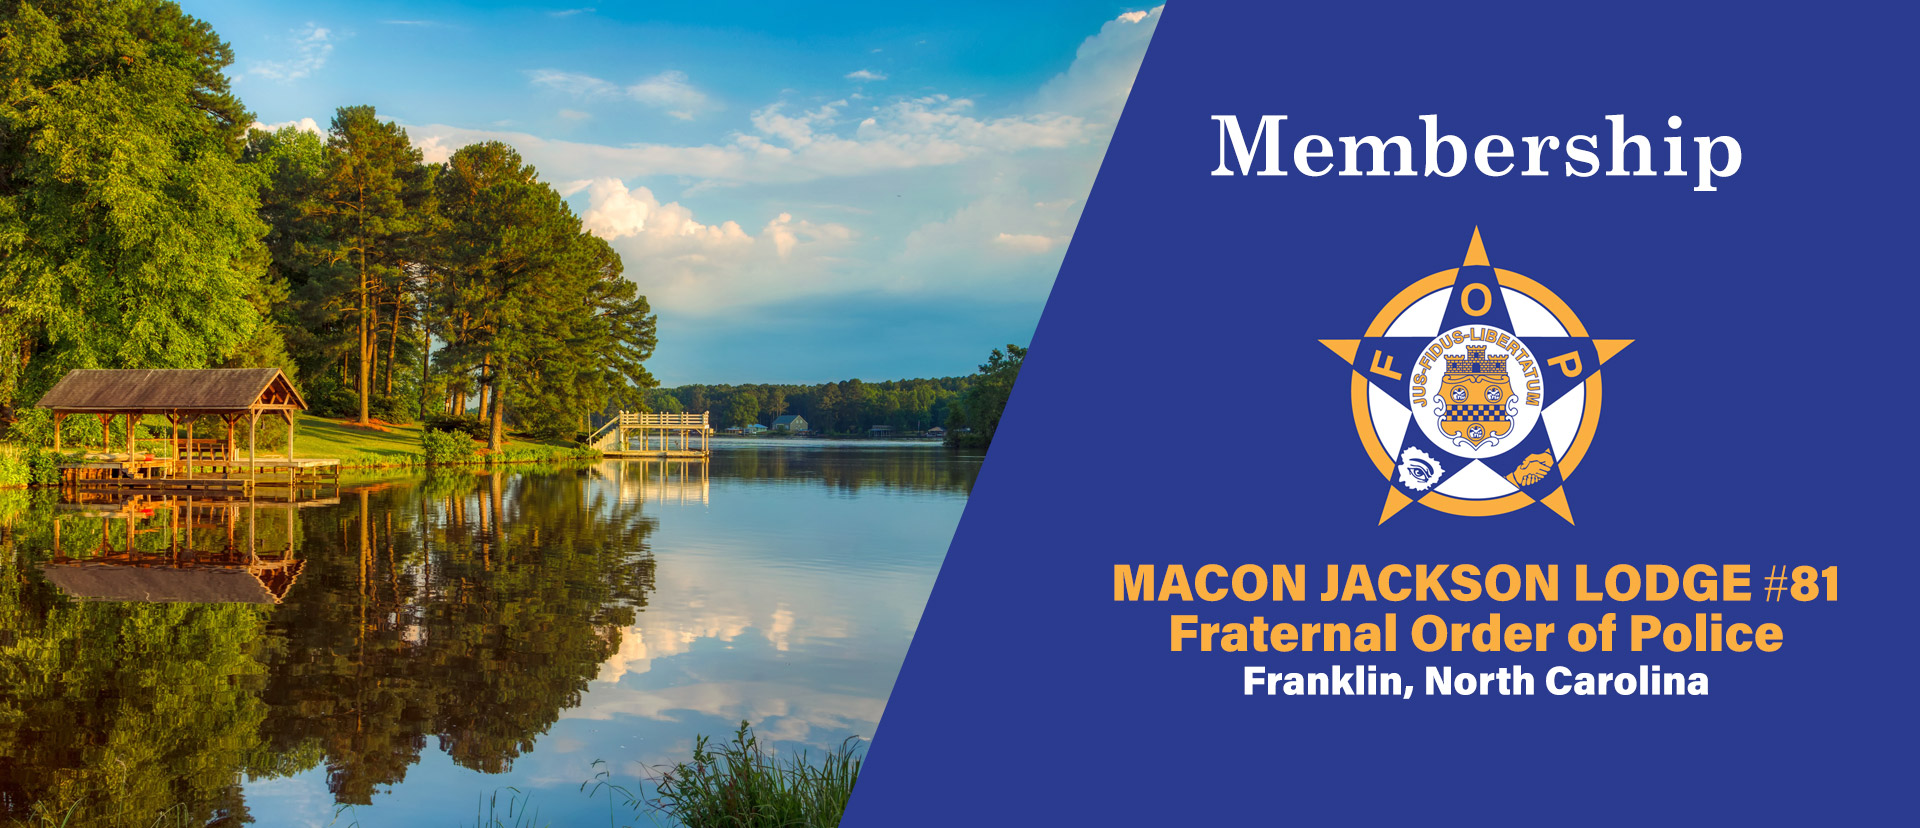 become member lodge 81 fraternal order of police macon jackson county nc